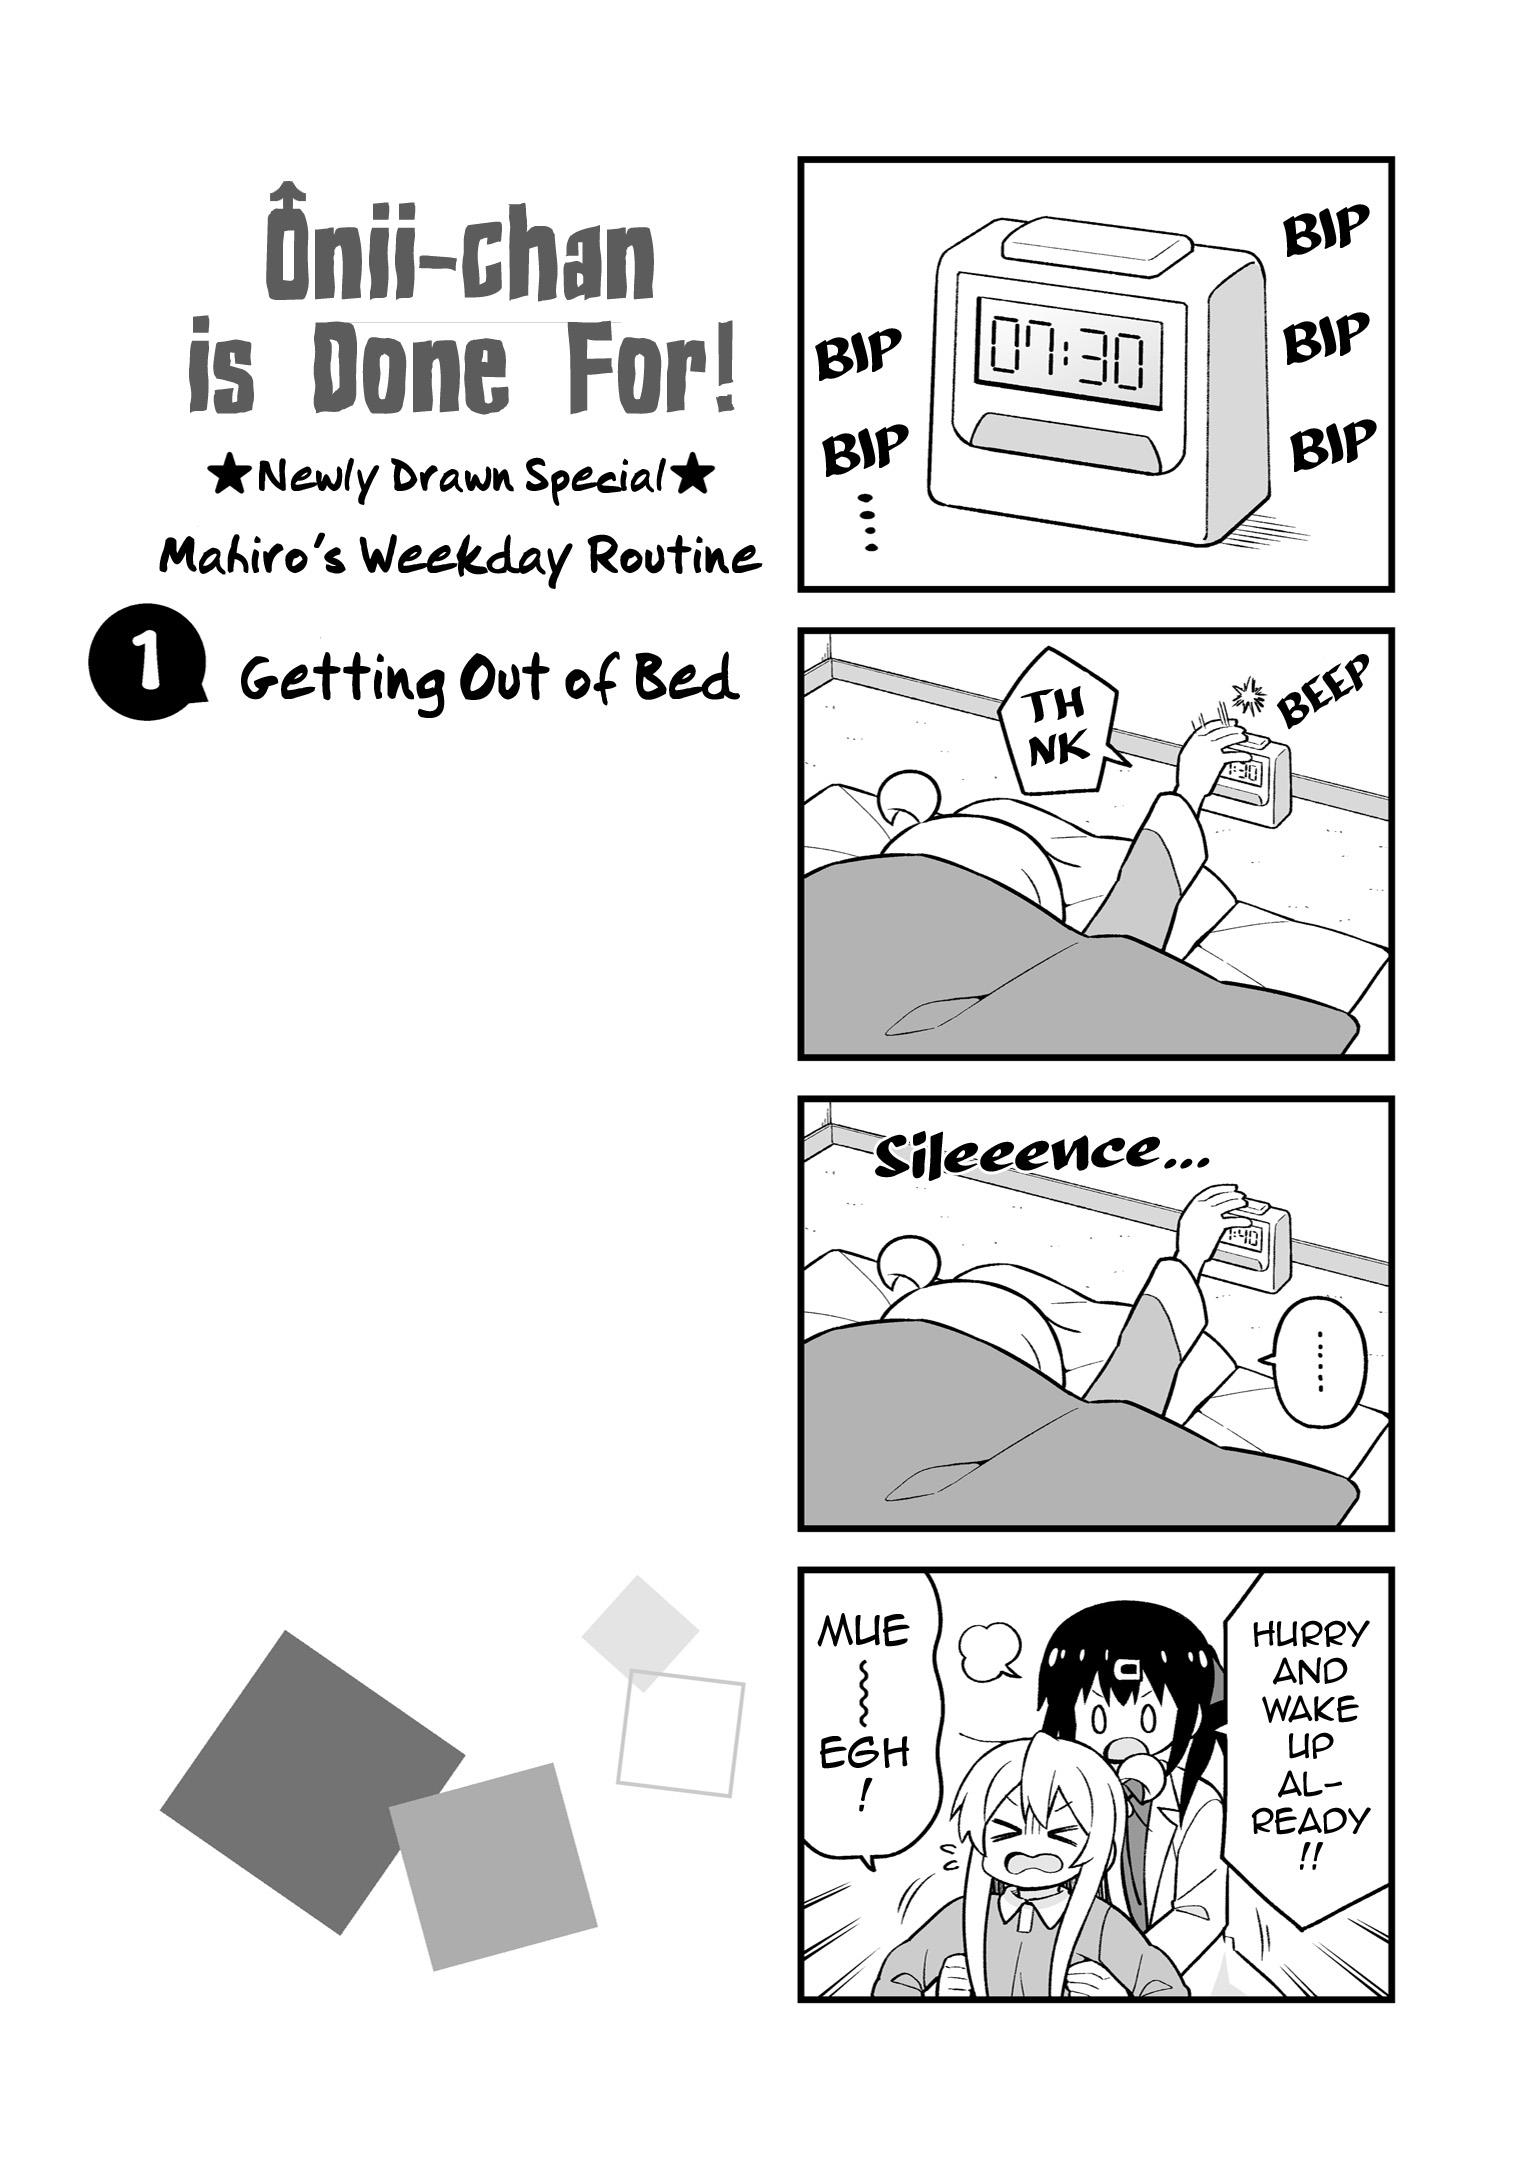 Onii-Chan Is Done For Vol.4 Chapter 36.9: Mahiro's Weekday Routine + Omnibus 10-11-12 Extras - Picture 3